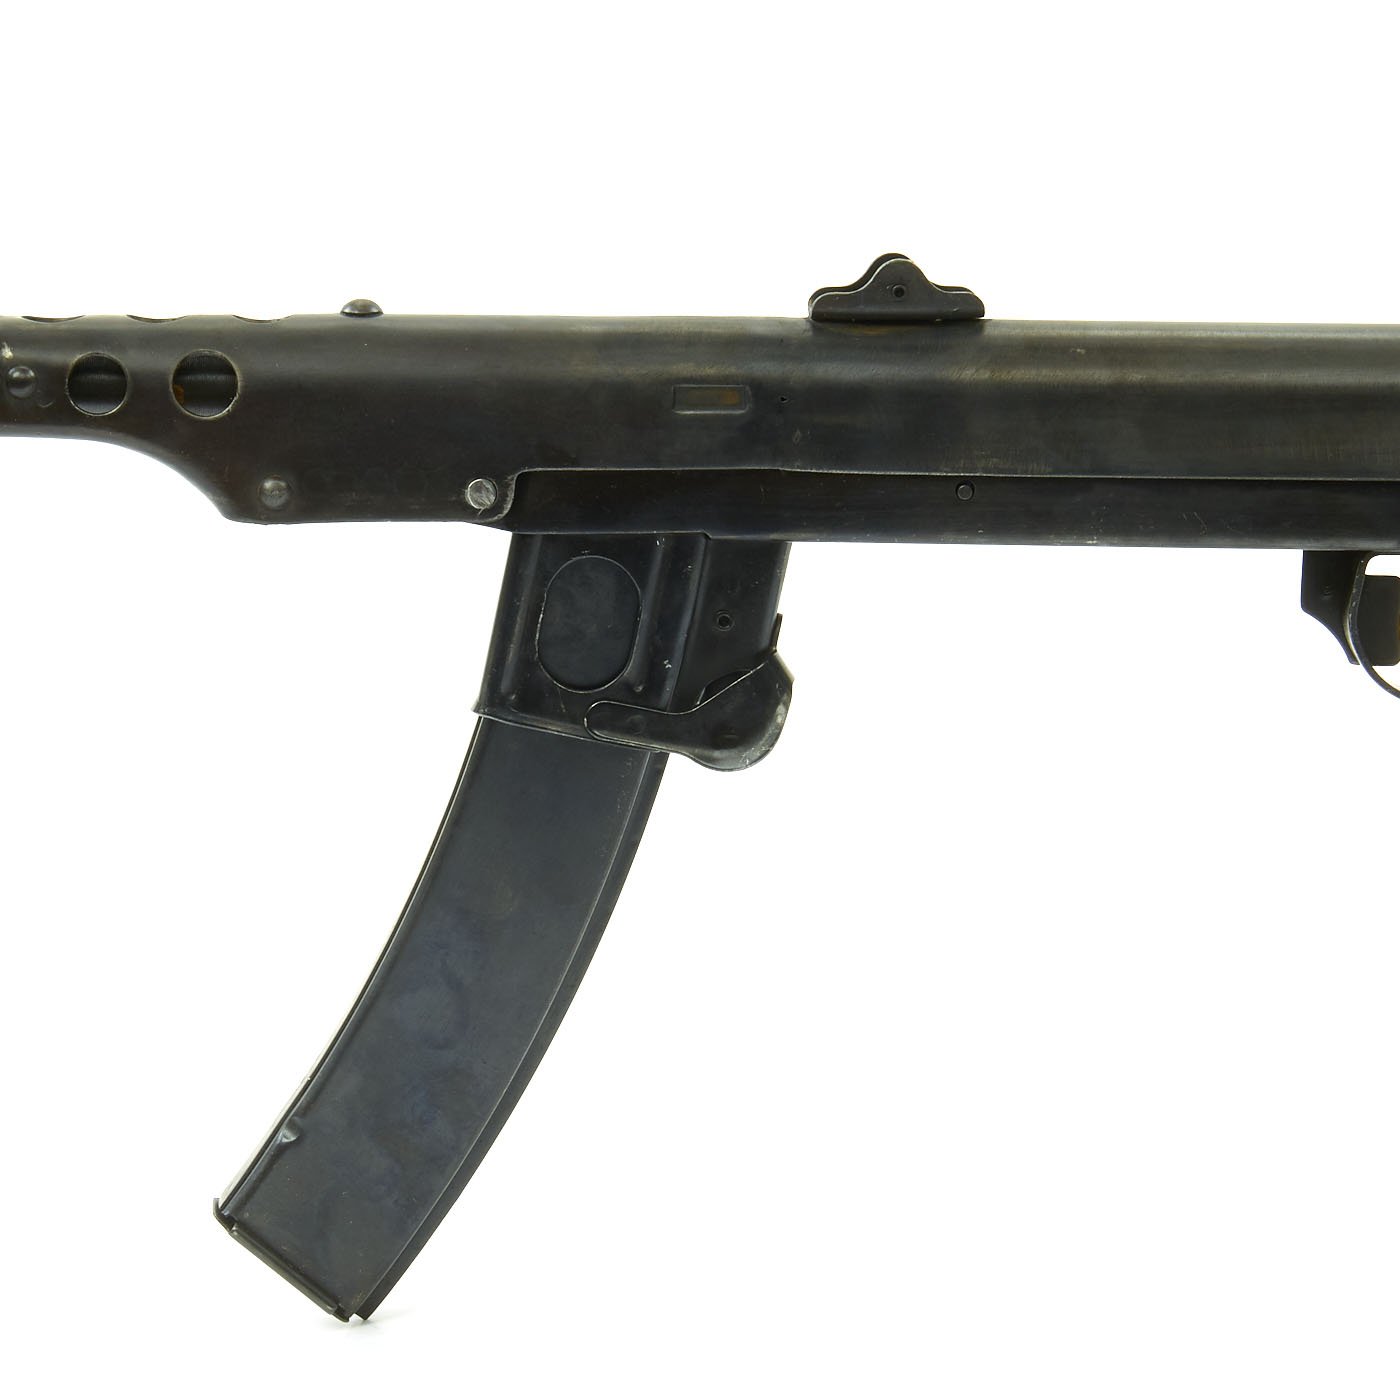 ZY Toys 1/6 WWII German PPS 43 Submachine Gun for Action Figure [ZY-PPS43]